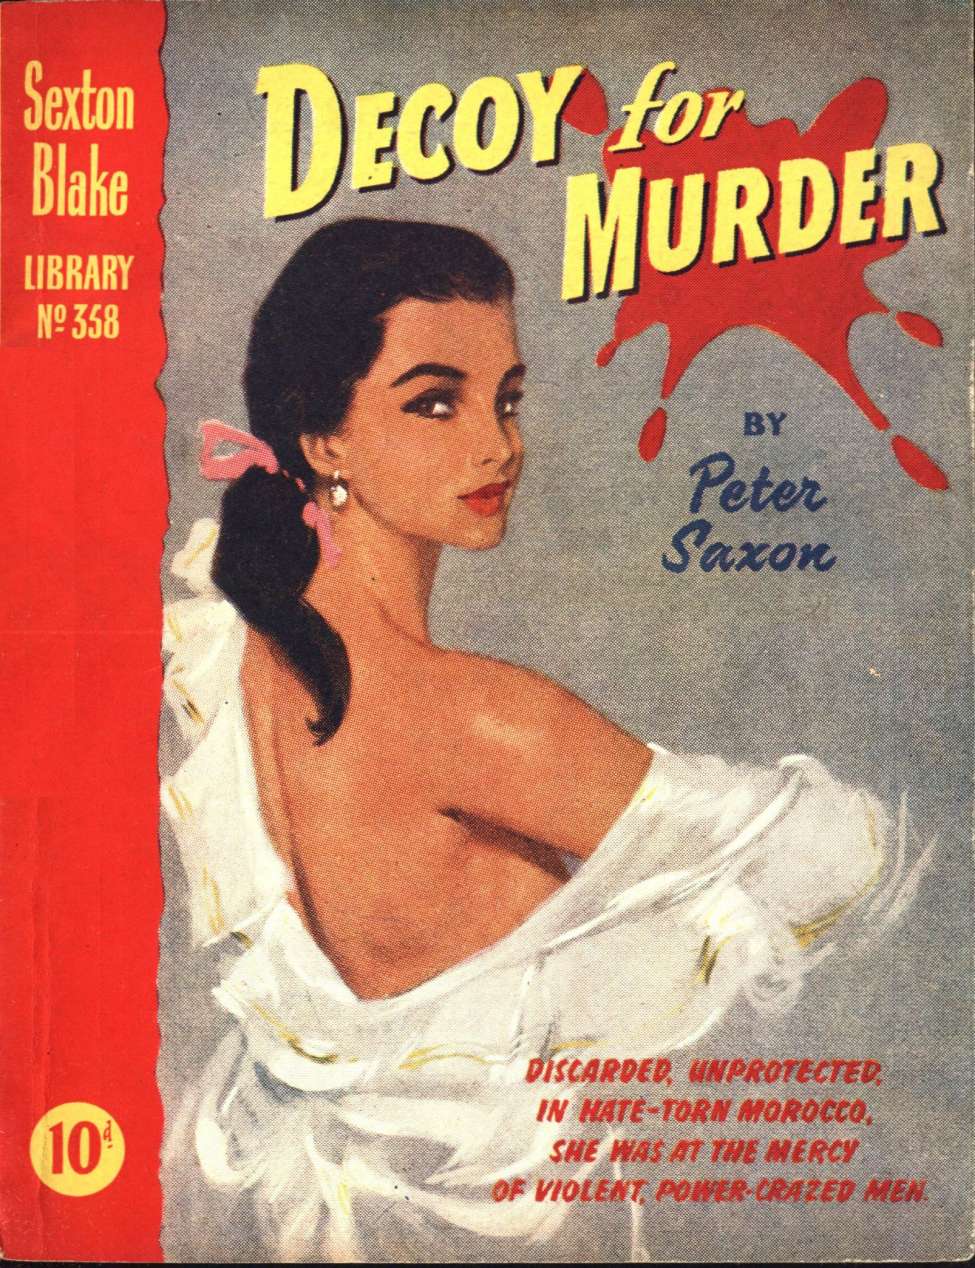 Book Cover For Sexton Blake Library S3 358 - Decoy for Murder